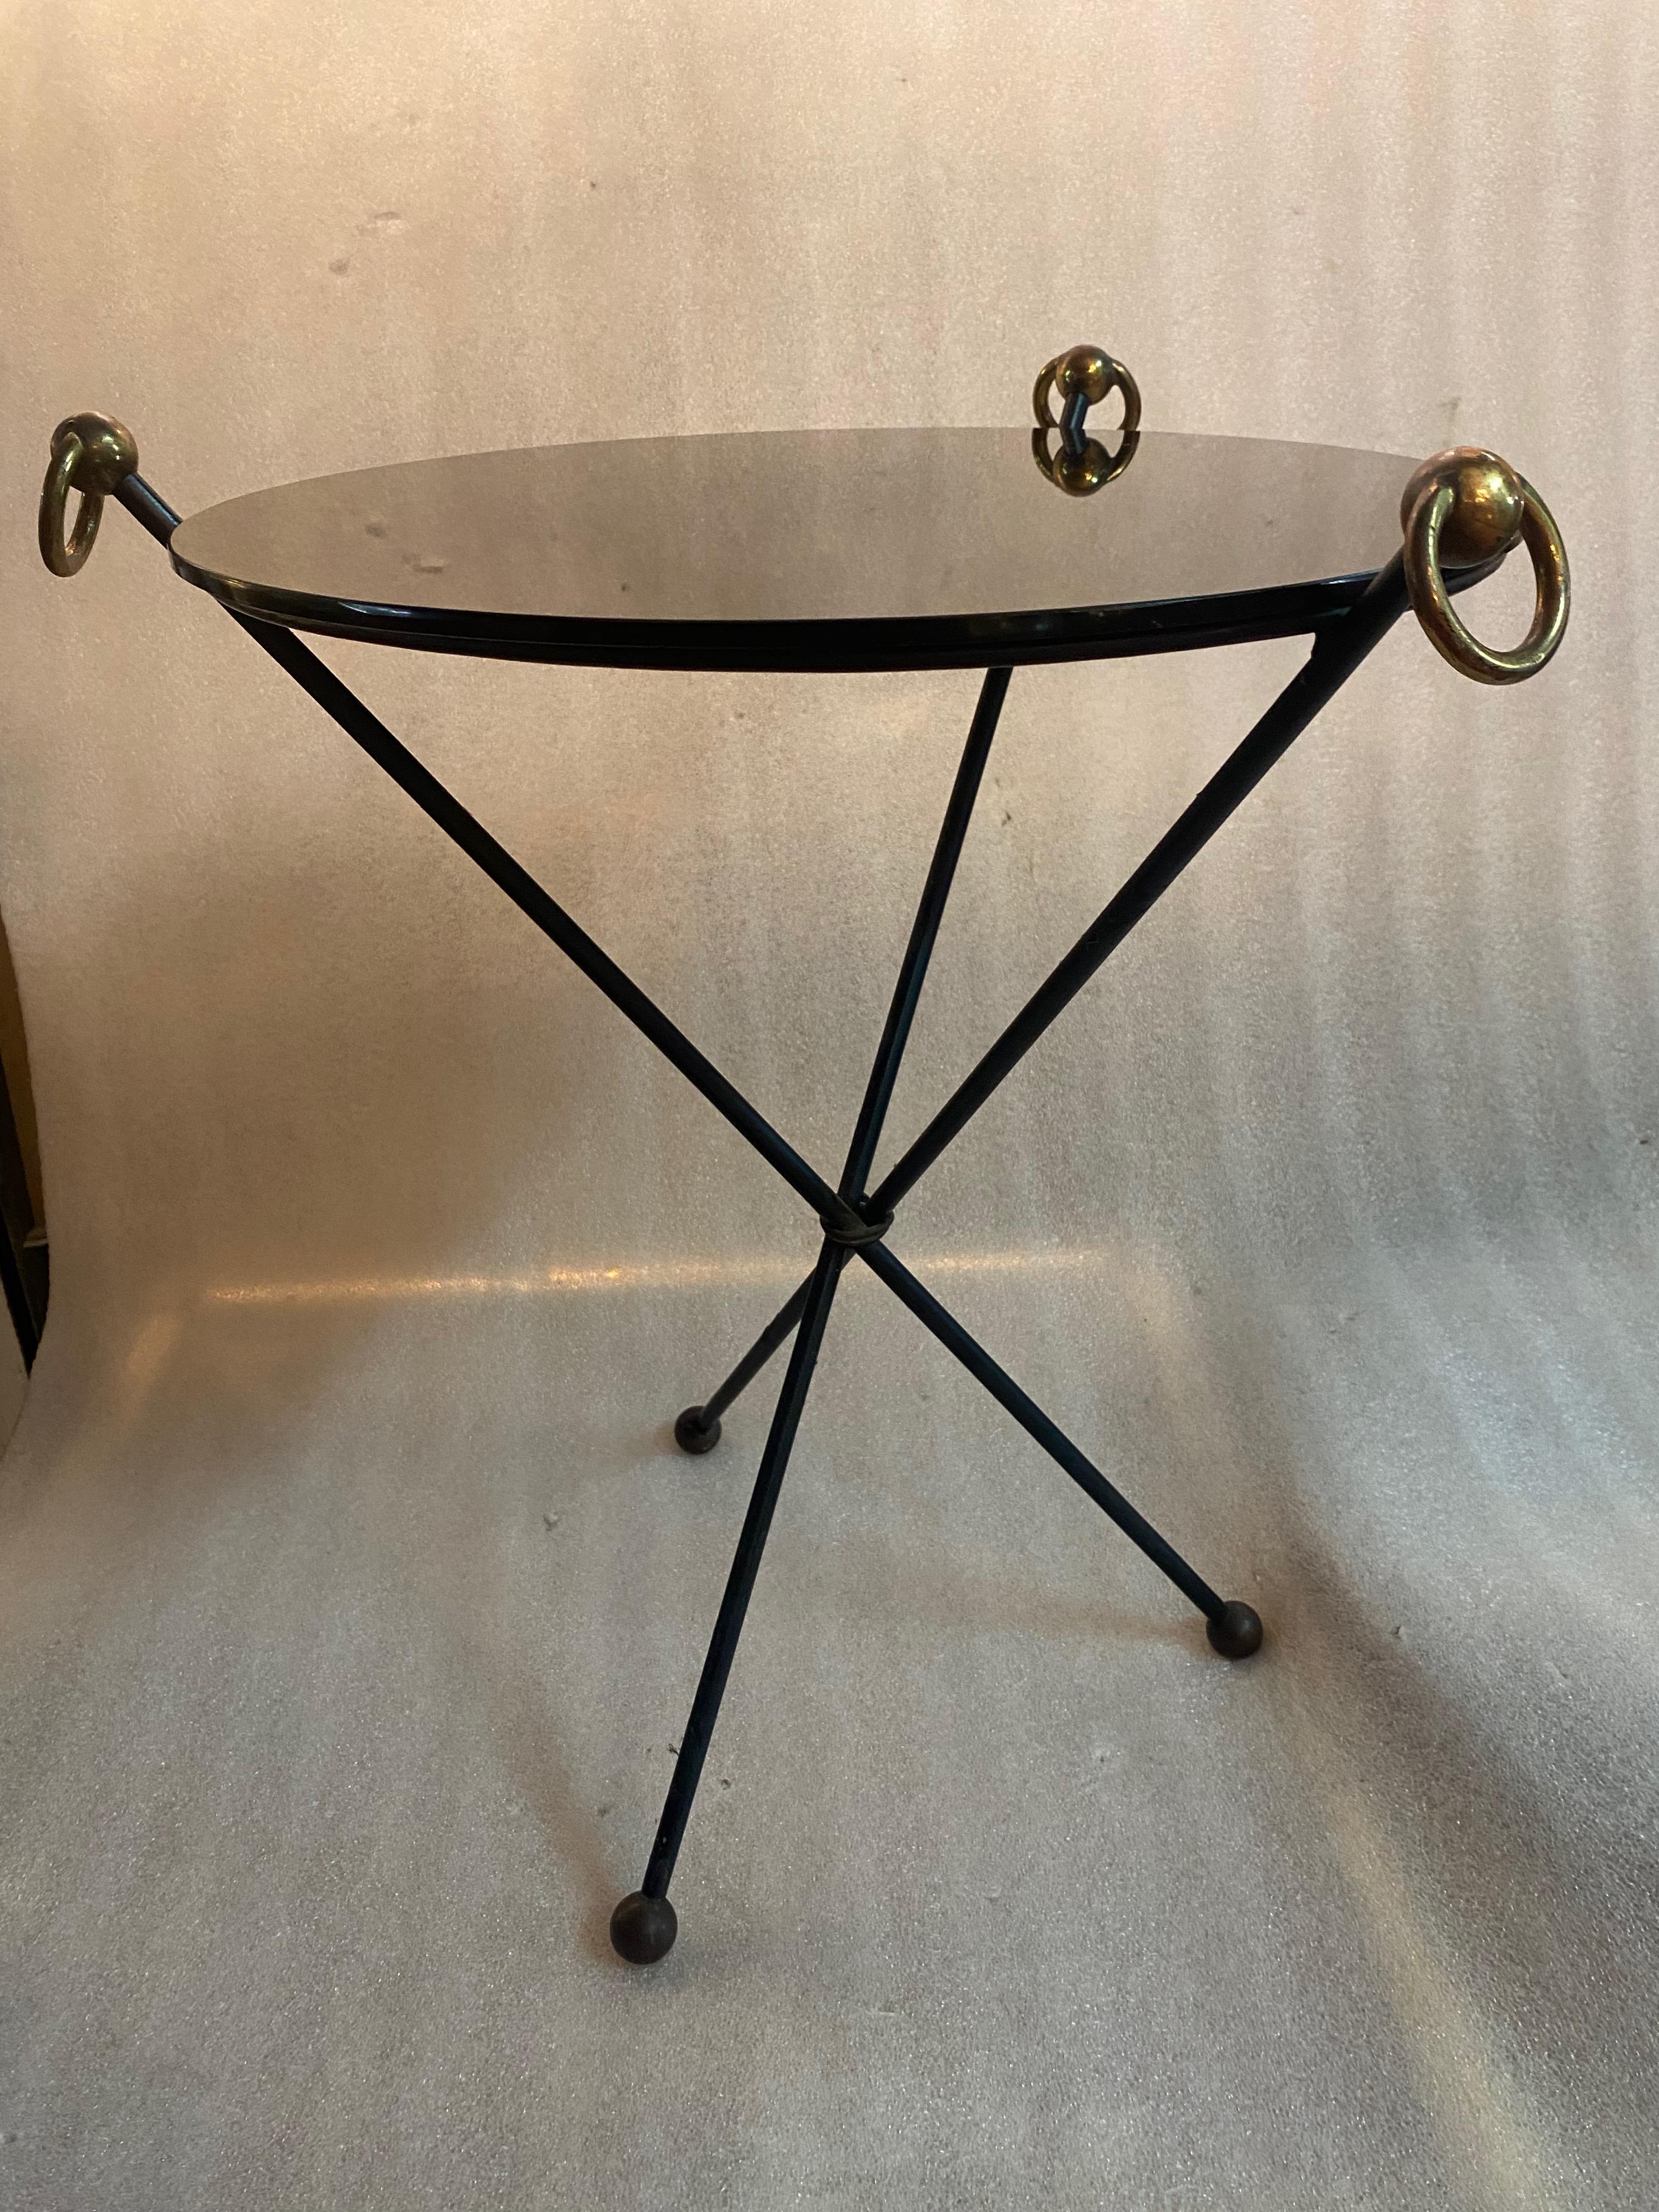 Unsigned tripod pedestal table in wrought iron and brass ornaments with buckles at the end of the uprights, feet ending in balls, black opaline top
Condition of use
Circa 1940/50
Plate diameter: 41 cm
Height to the top: 49 cm
Height: 52